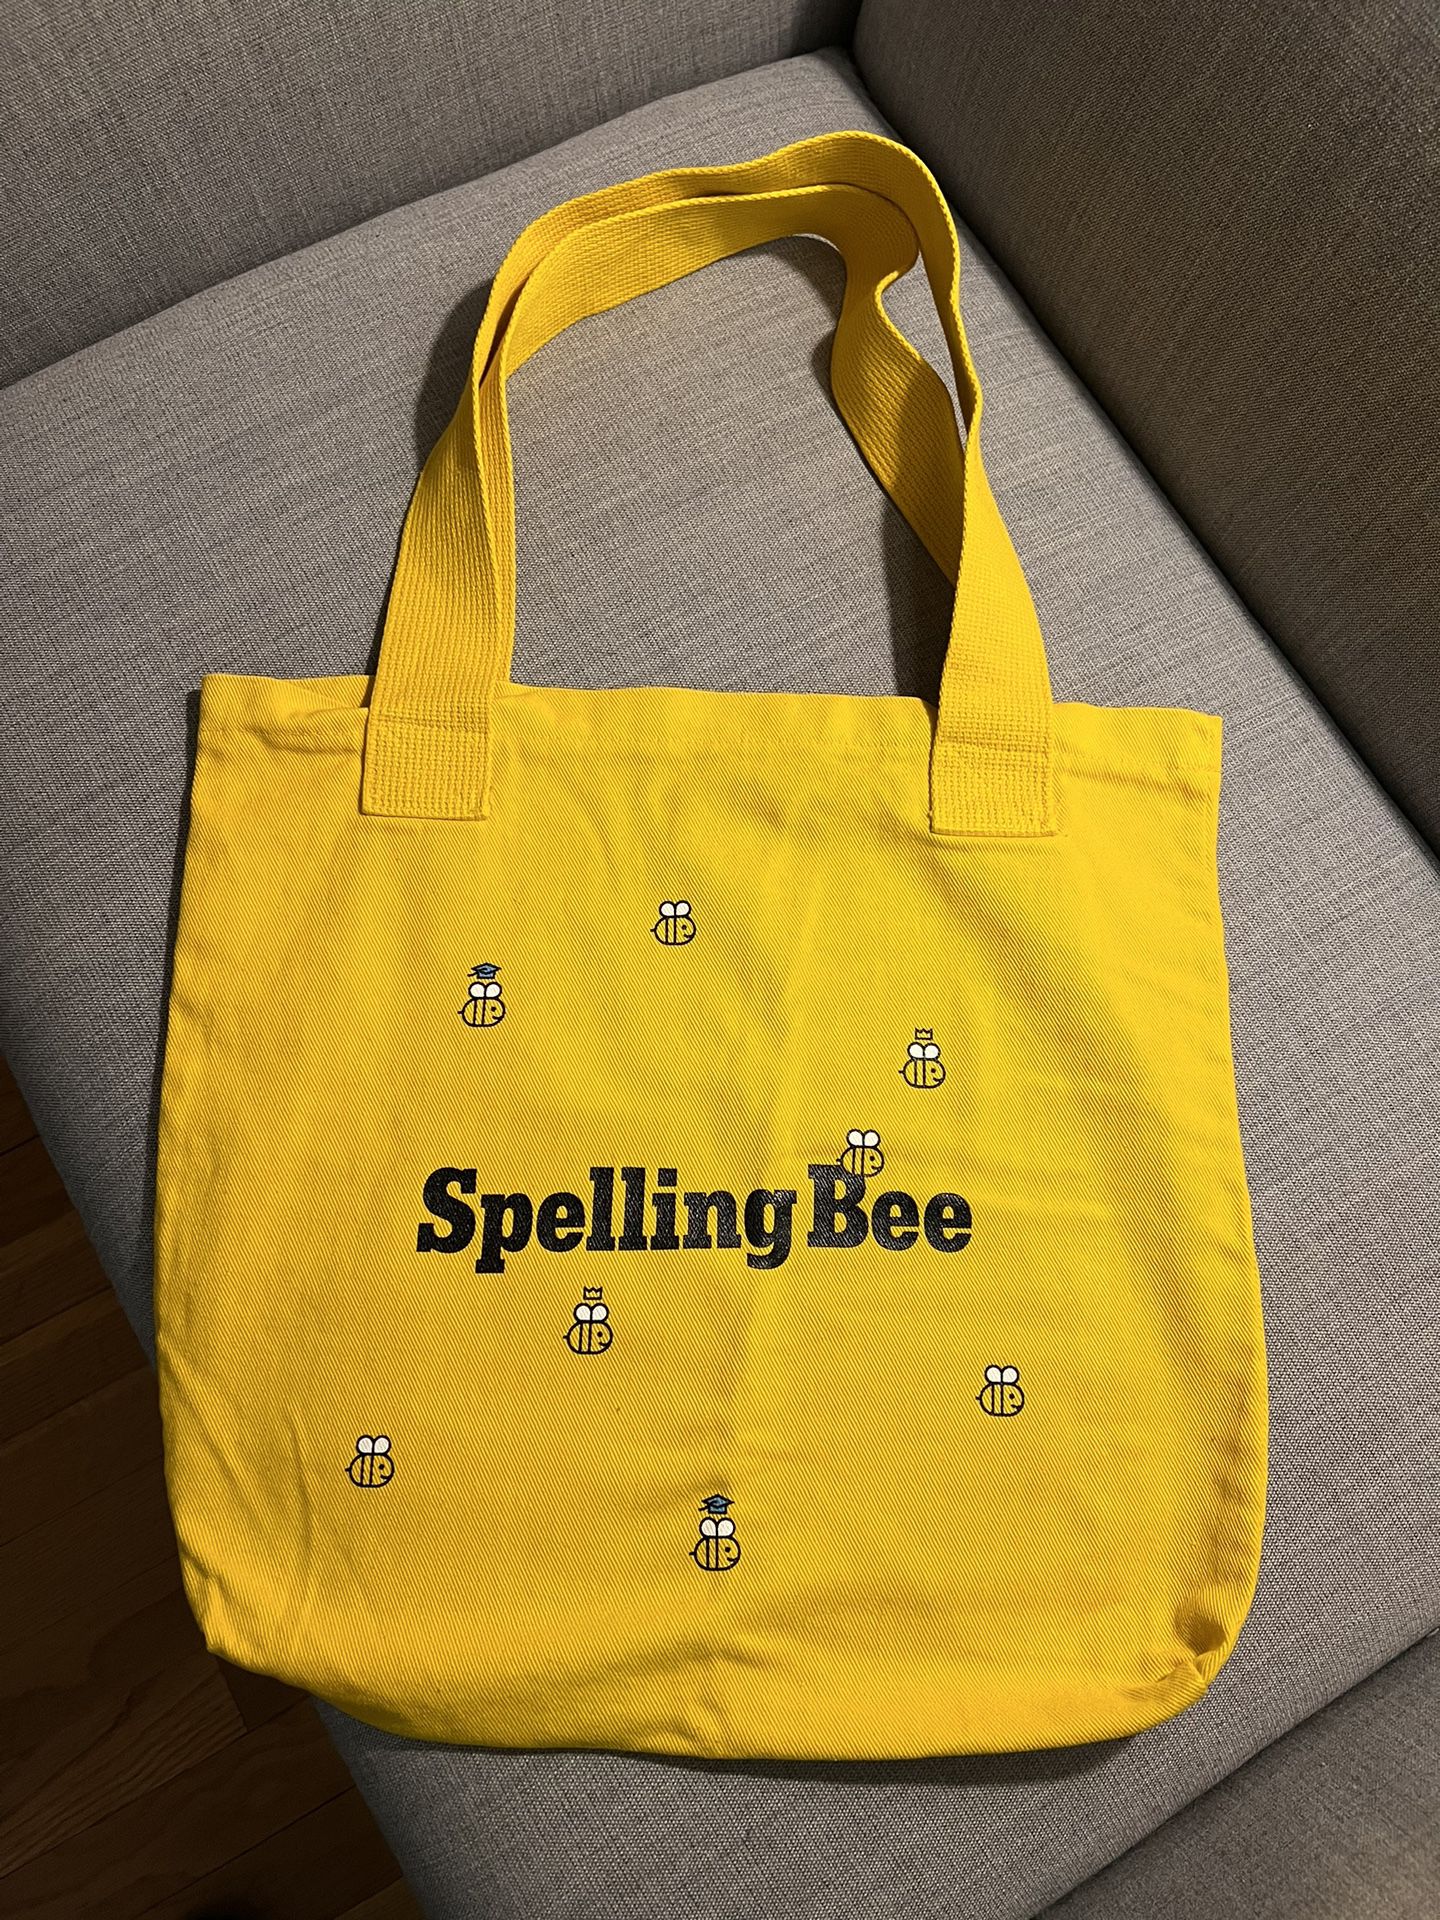 New York Times Spelling Bee Tote Bag